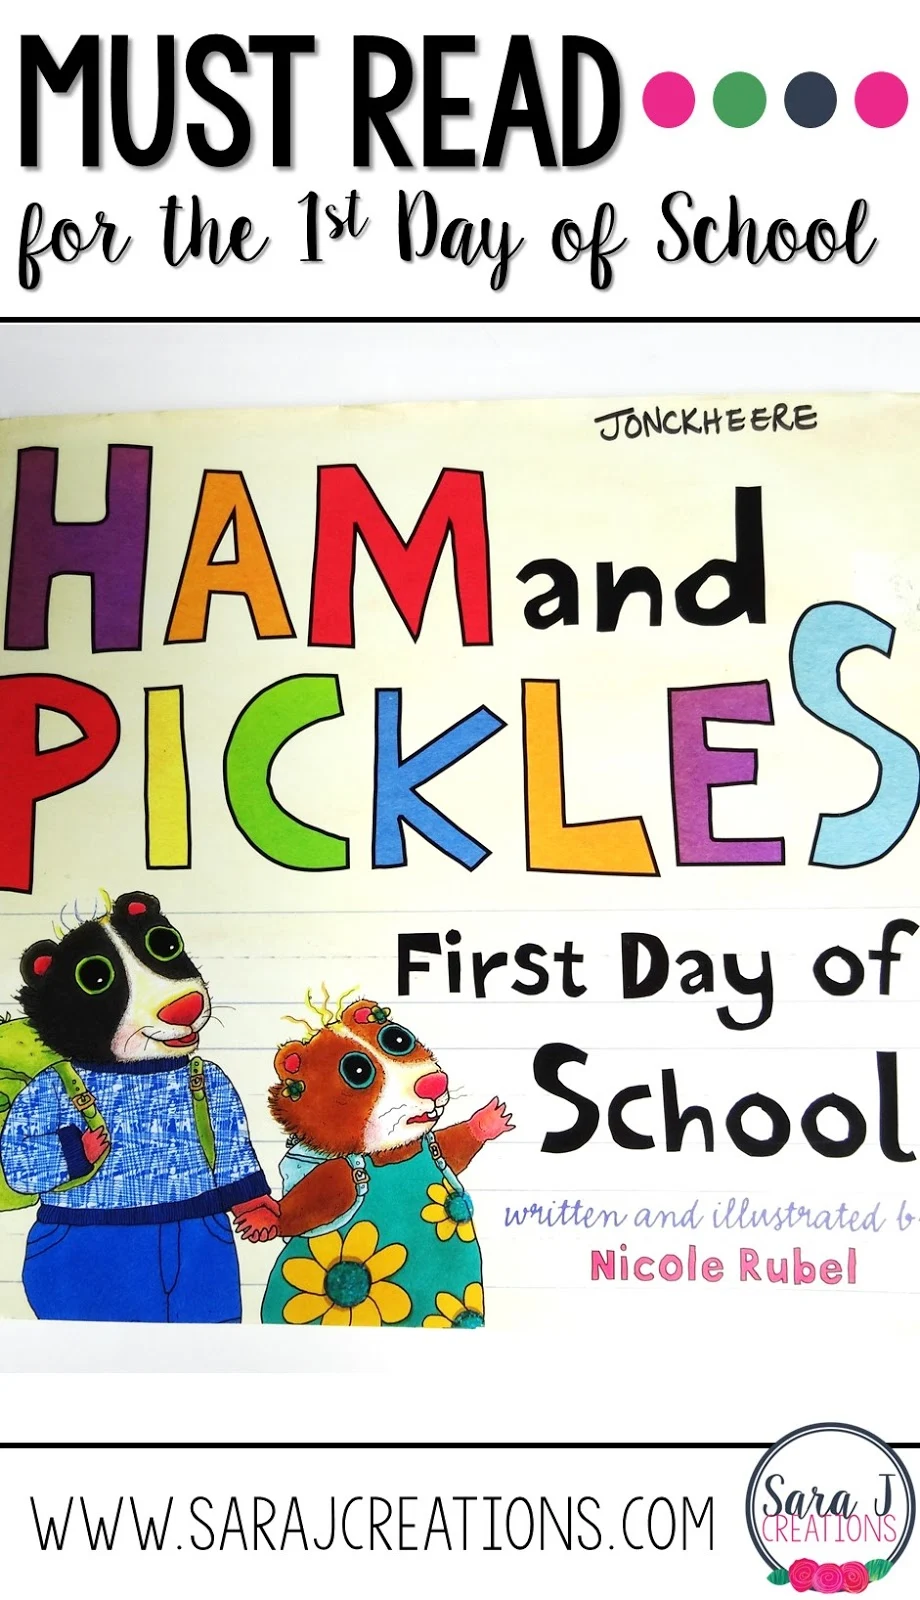 This is a funny book for back to school season and would be great on the first day of school.  The brother's silly advice for his sister's first day of school is funny to read to kids to ease their nerves.